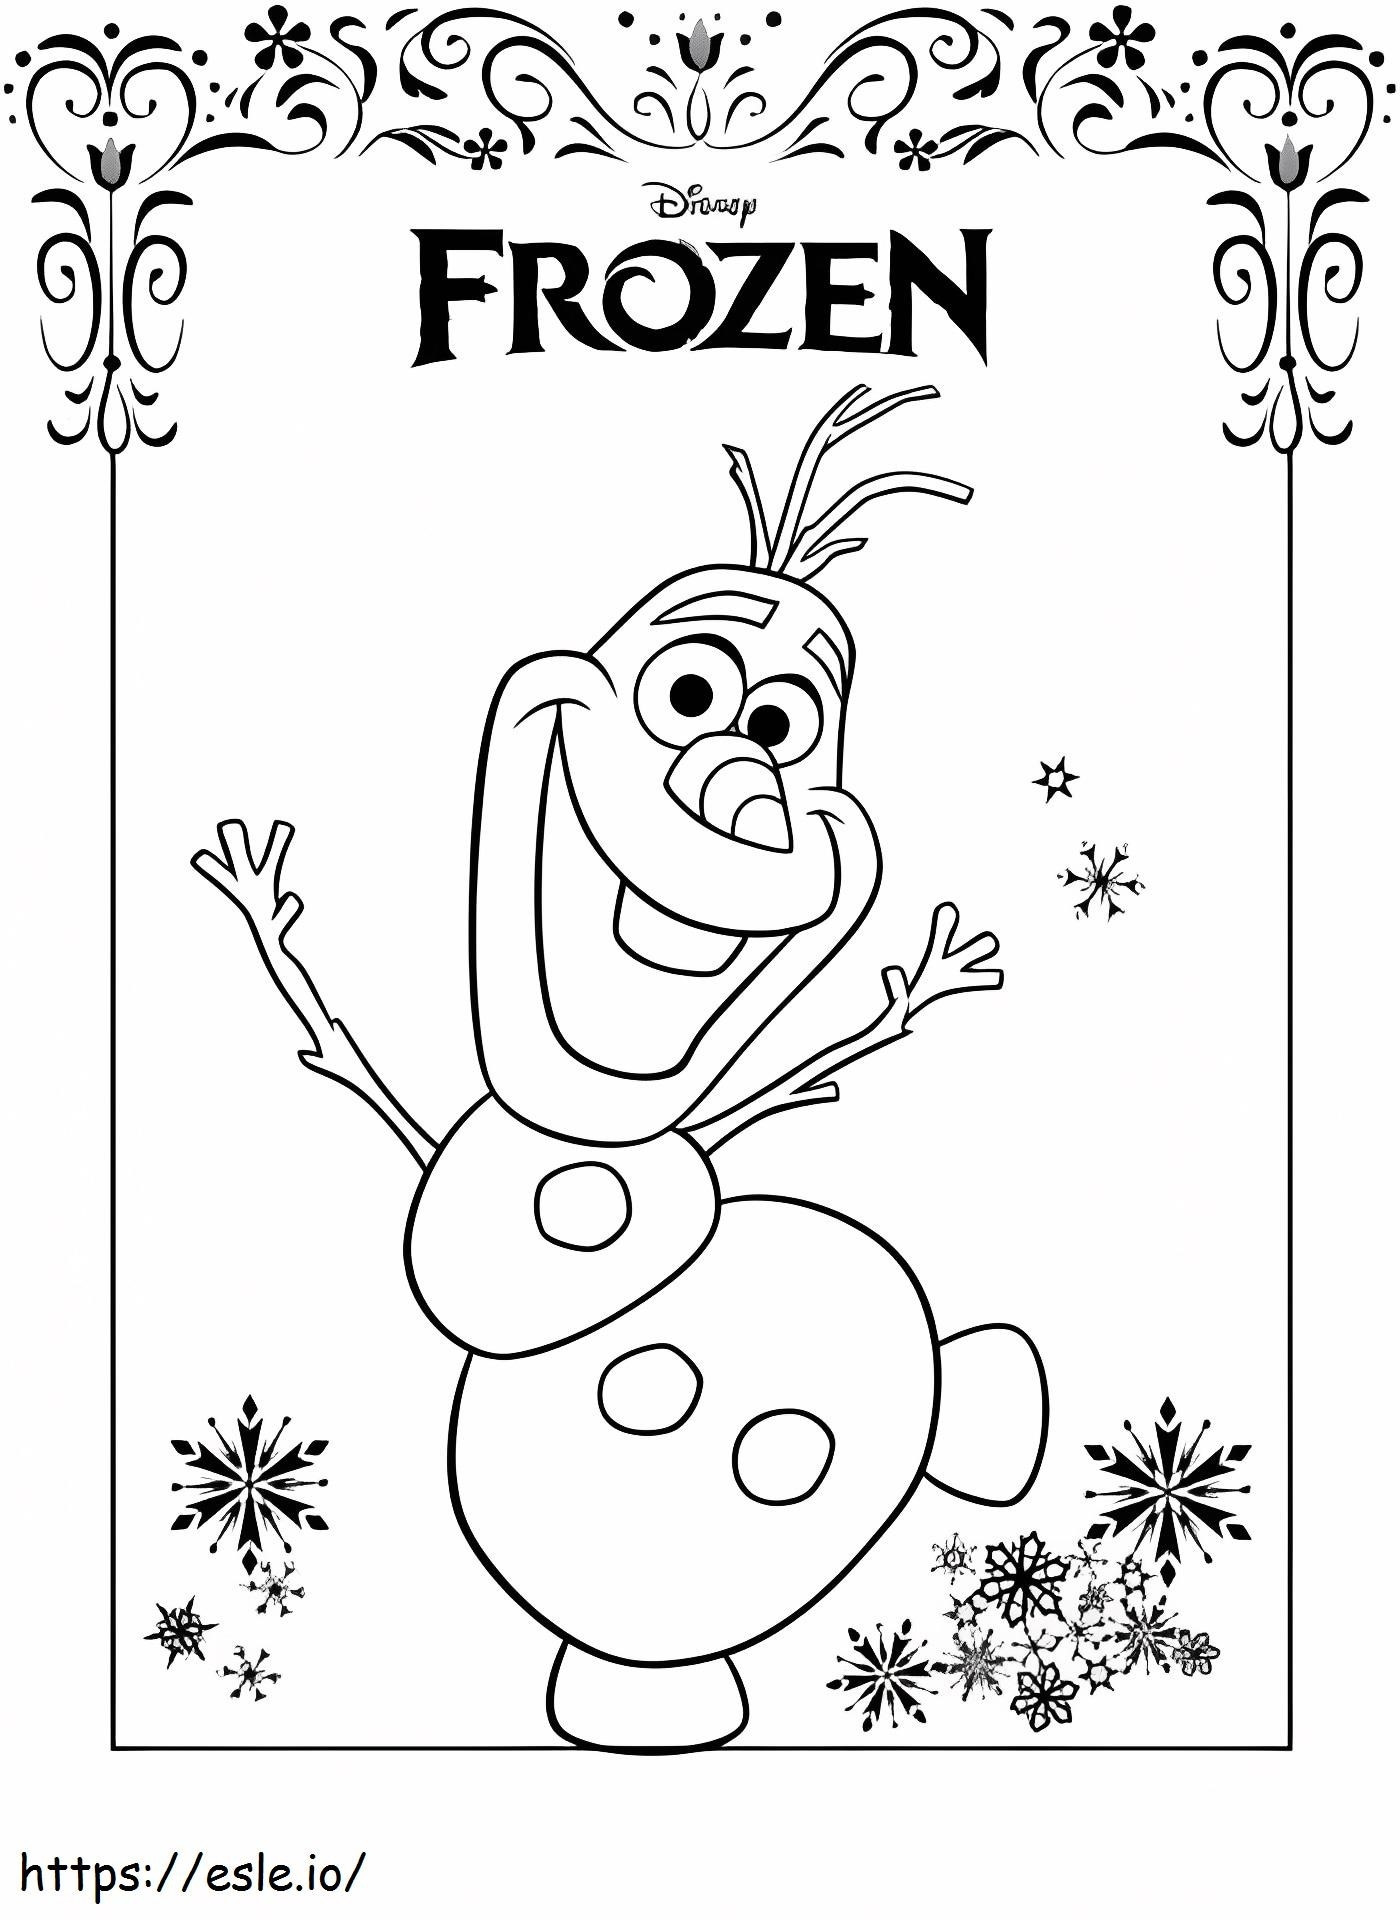 Frozen Olaf coloring page